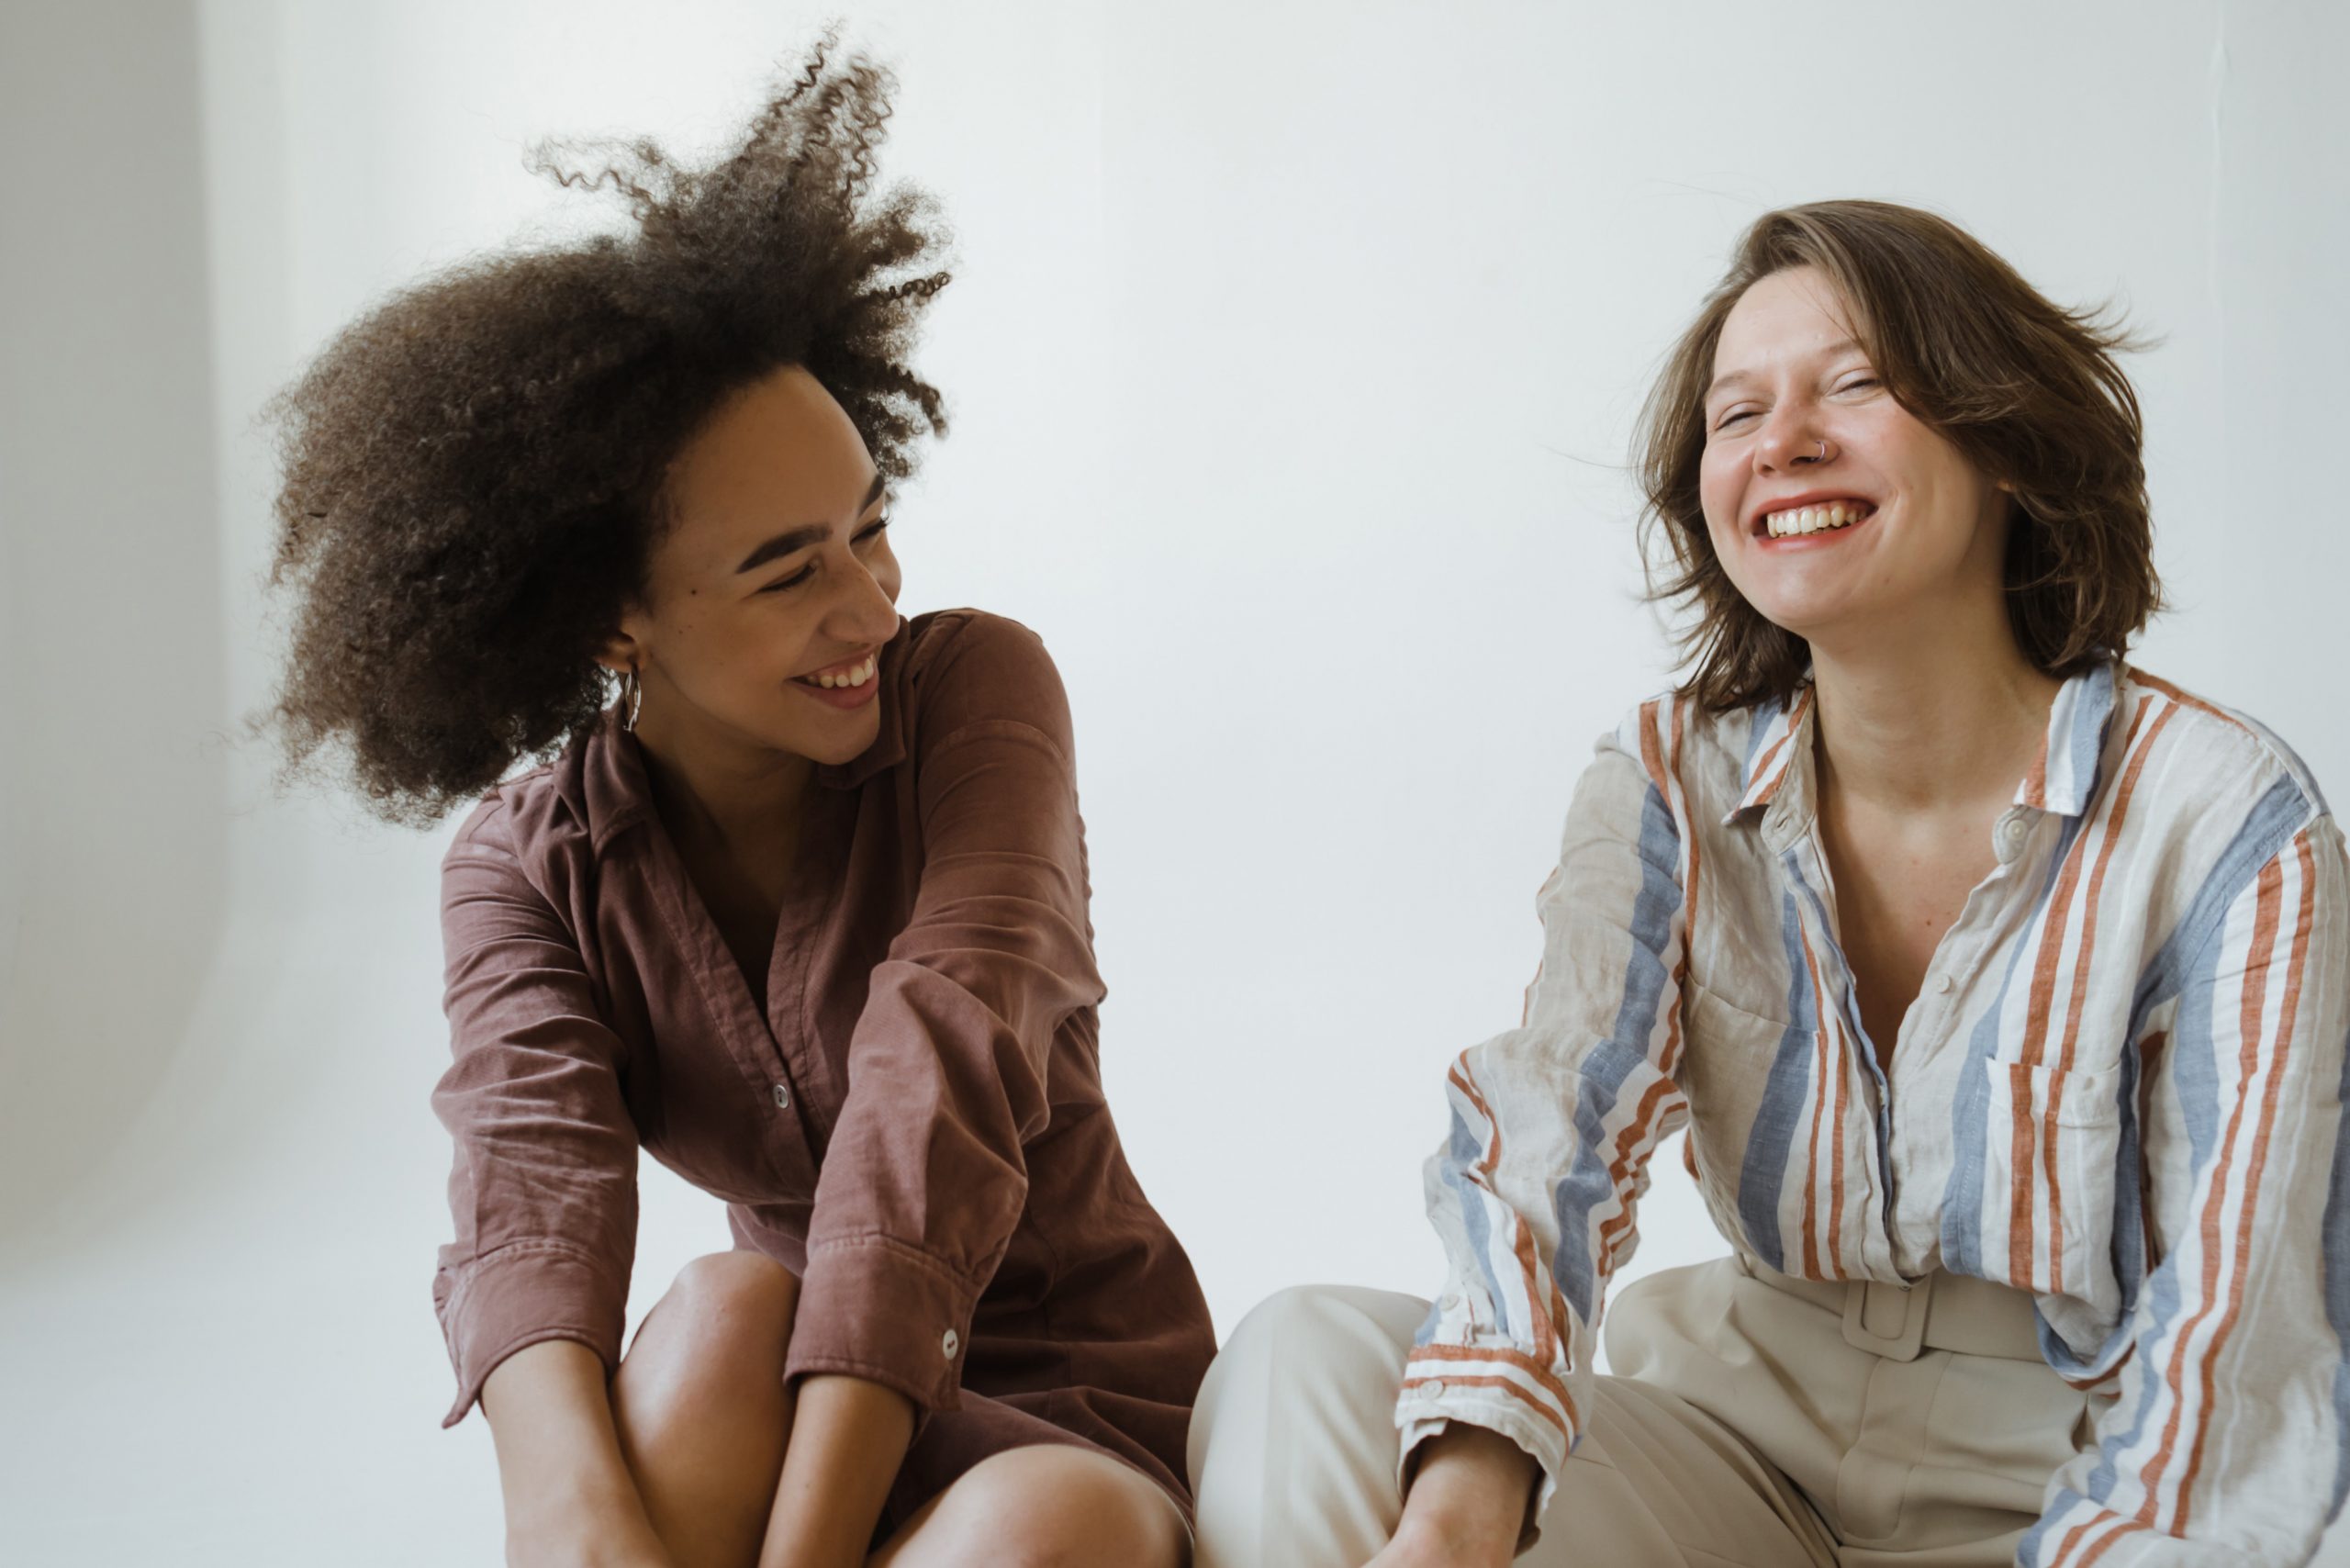 Two young women - one black, one white - share a moment, laughing together. 